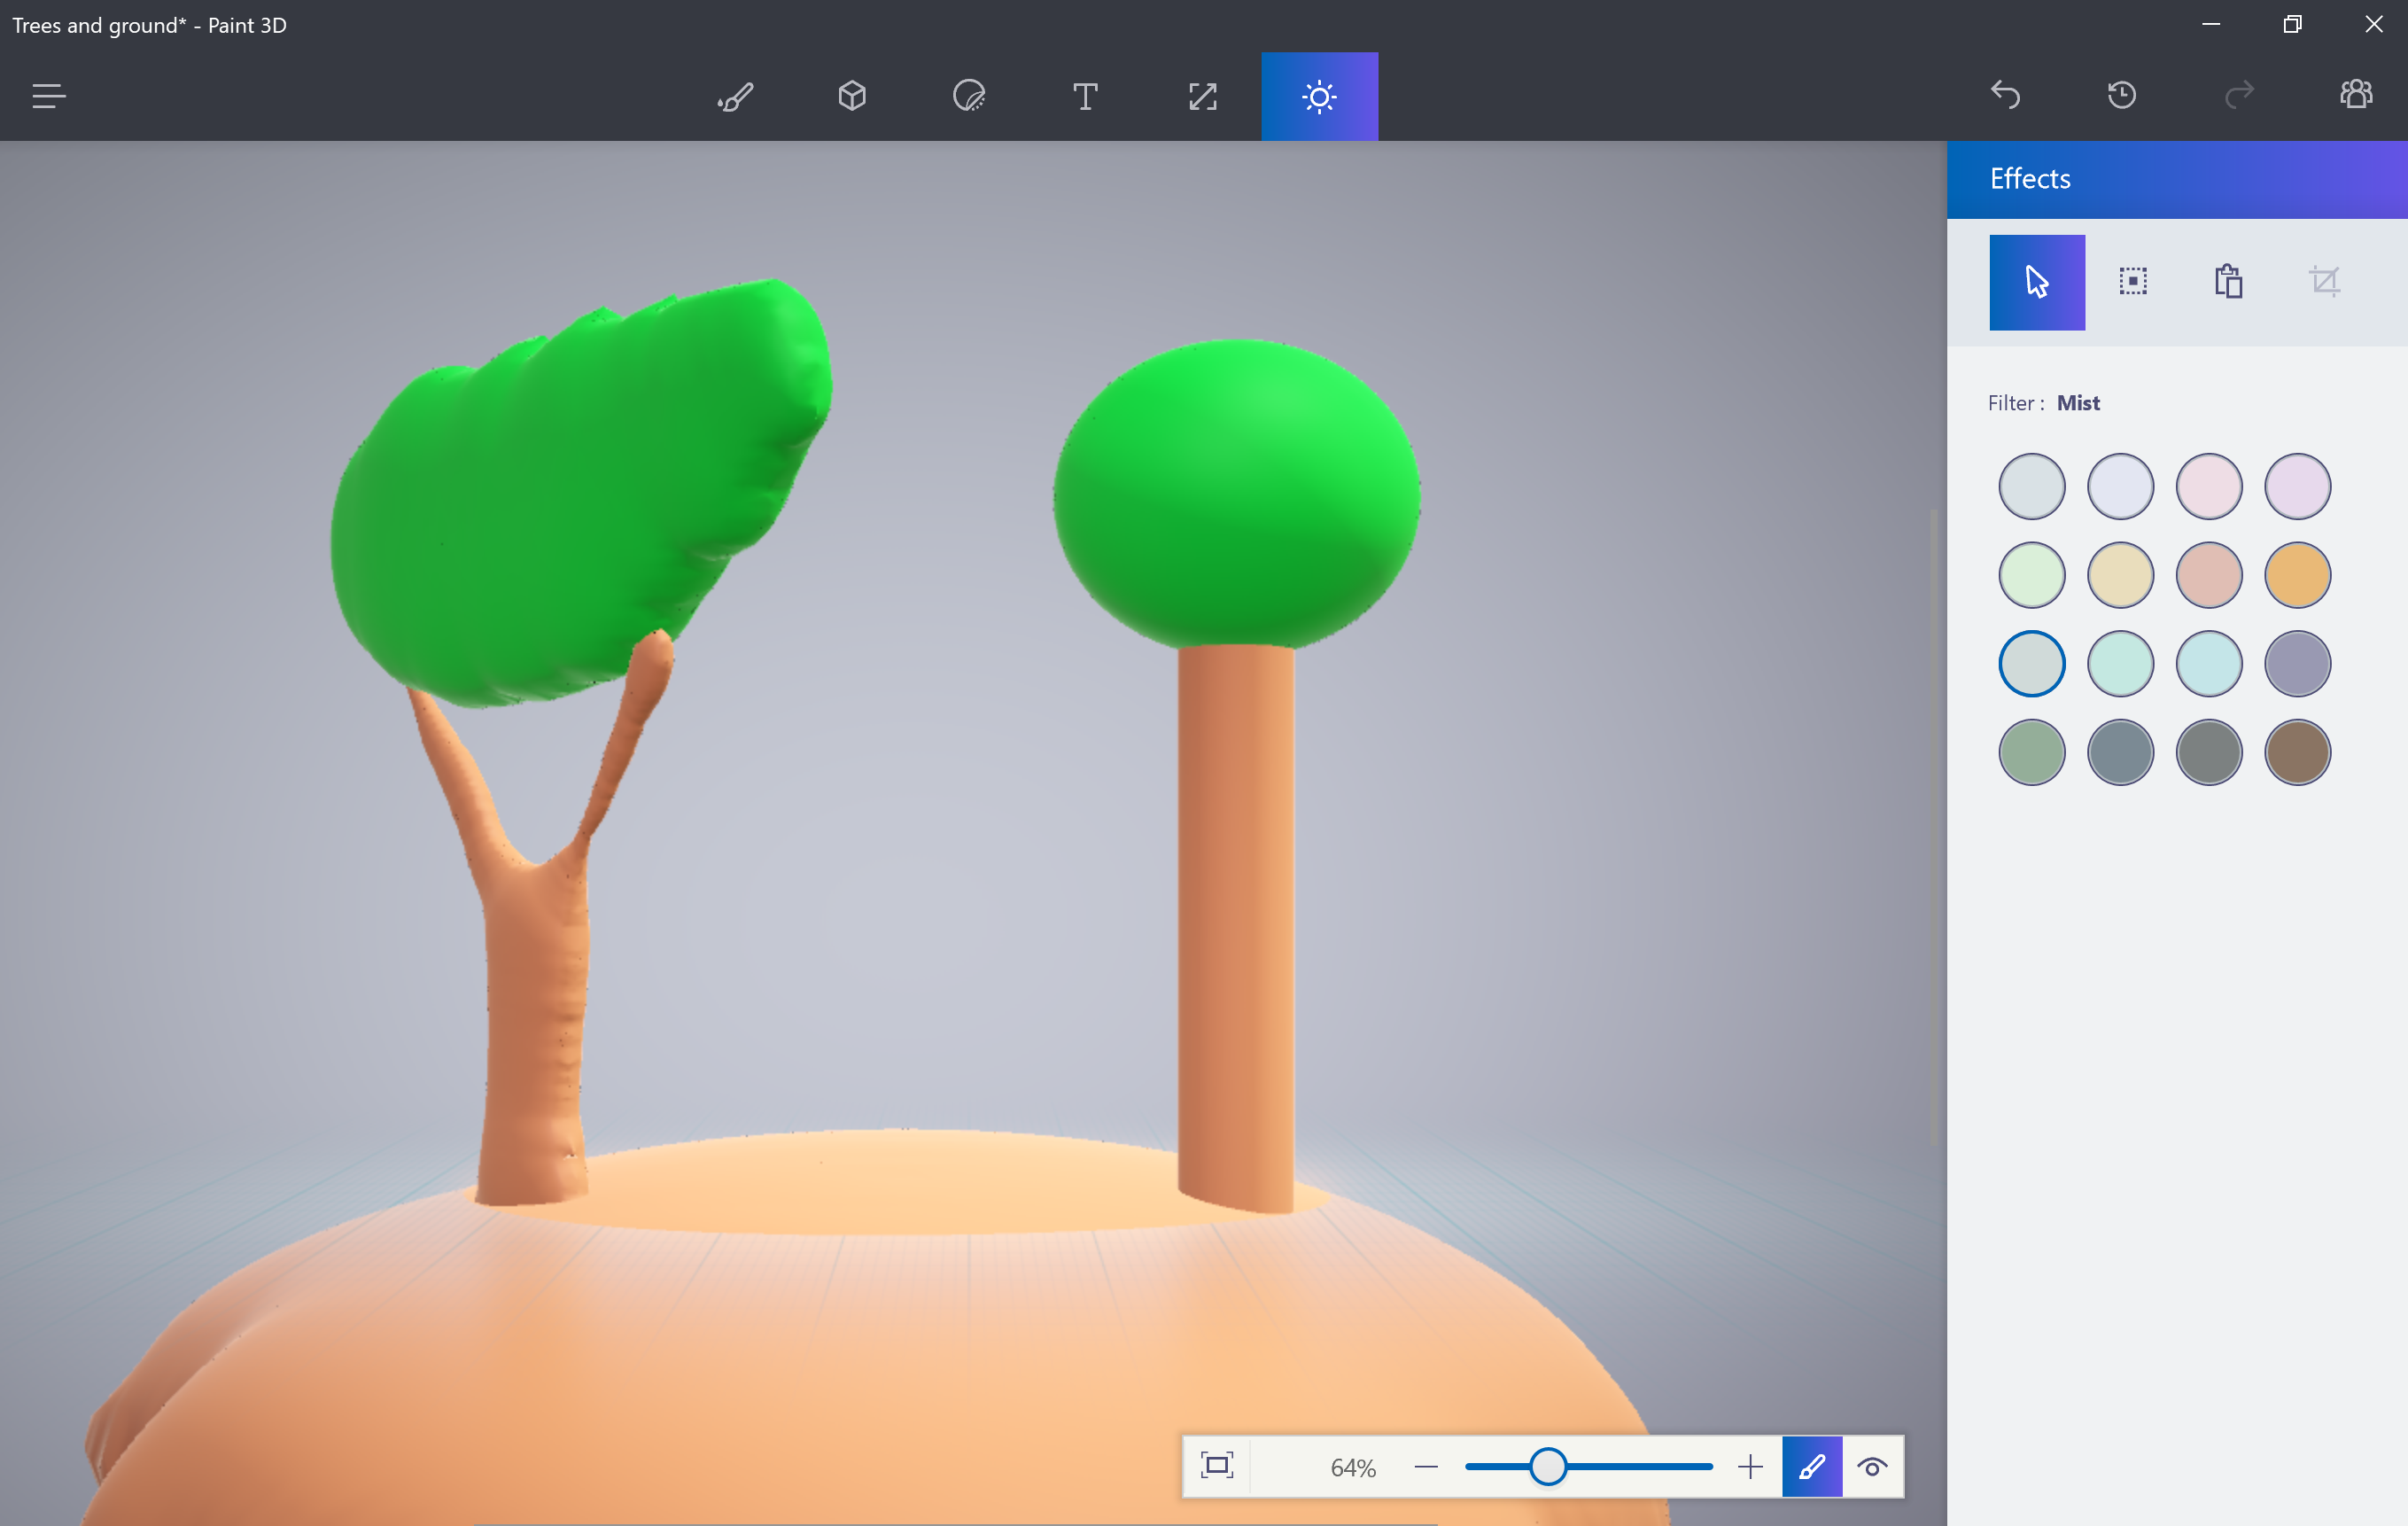 How to use Microsoft's Paint 3D in Windows 10 | PCWorld